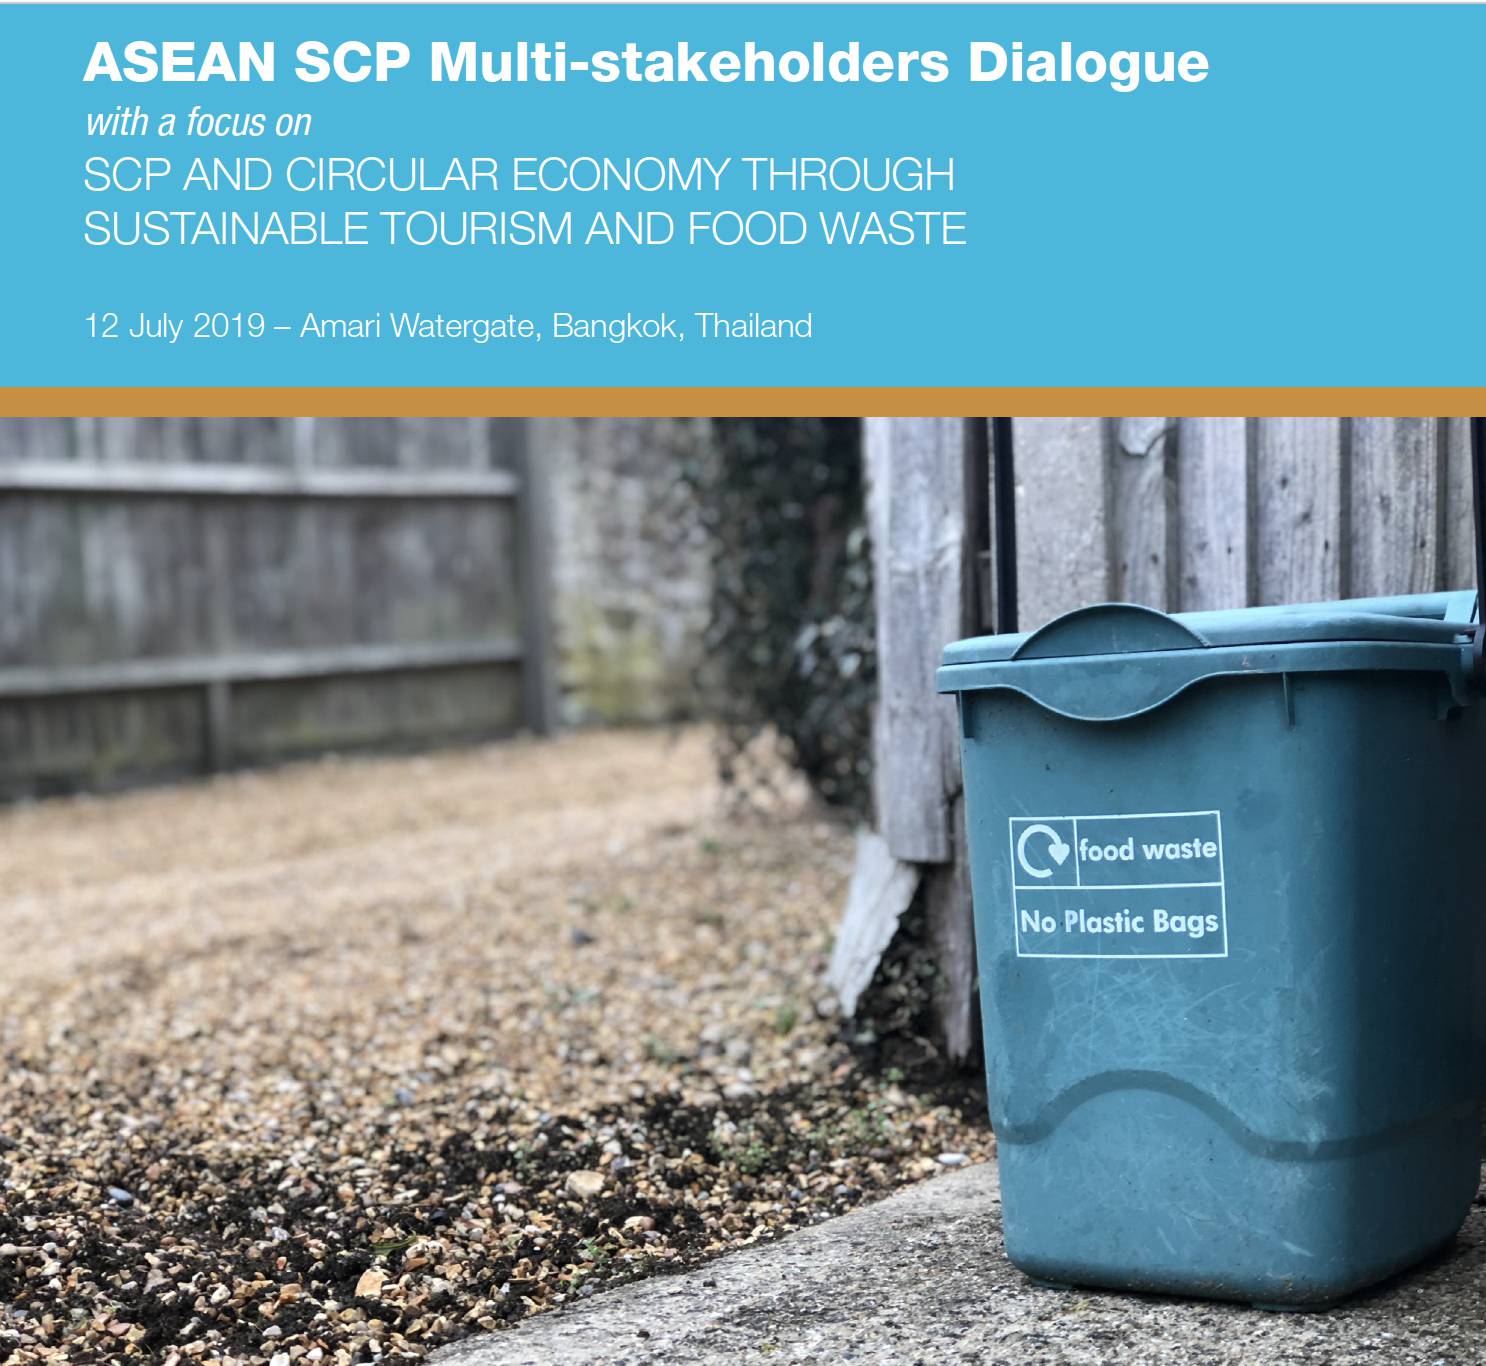 ASEAN SCP Multi-stakeholders Dialogue with a focus on SCP and Circular Economy through Sustainable Tourism and Food Waste